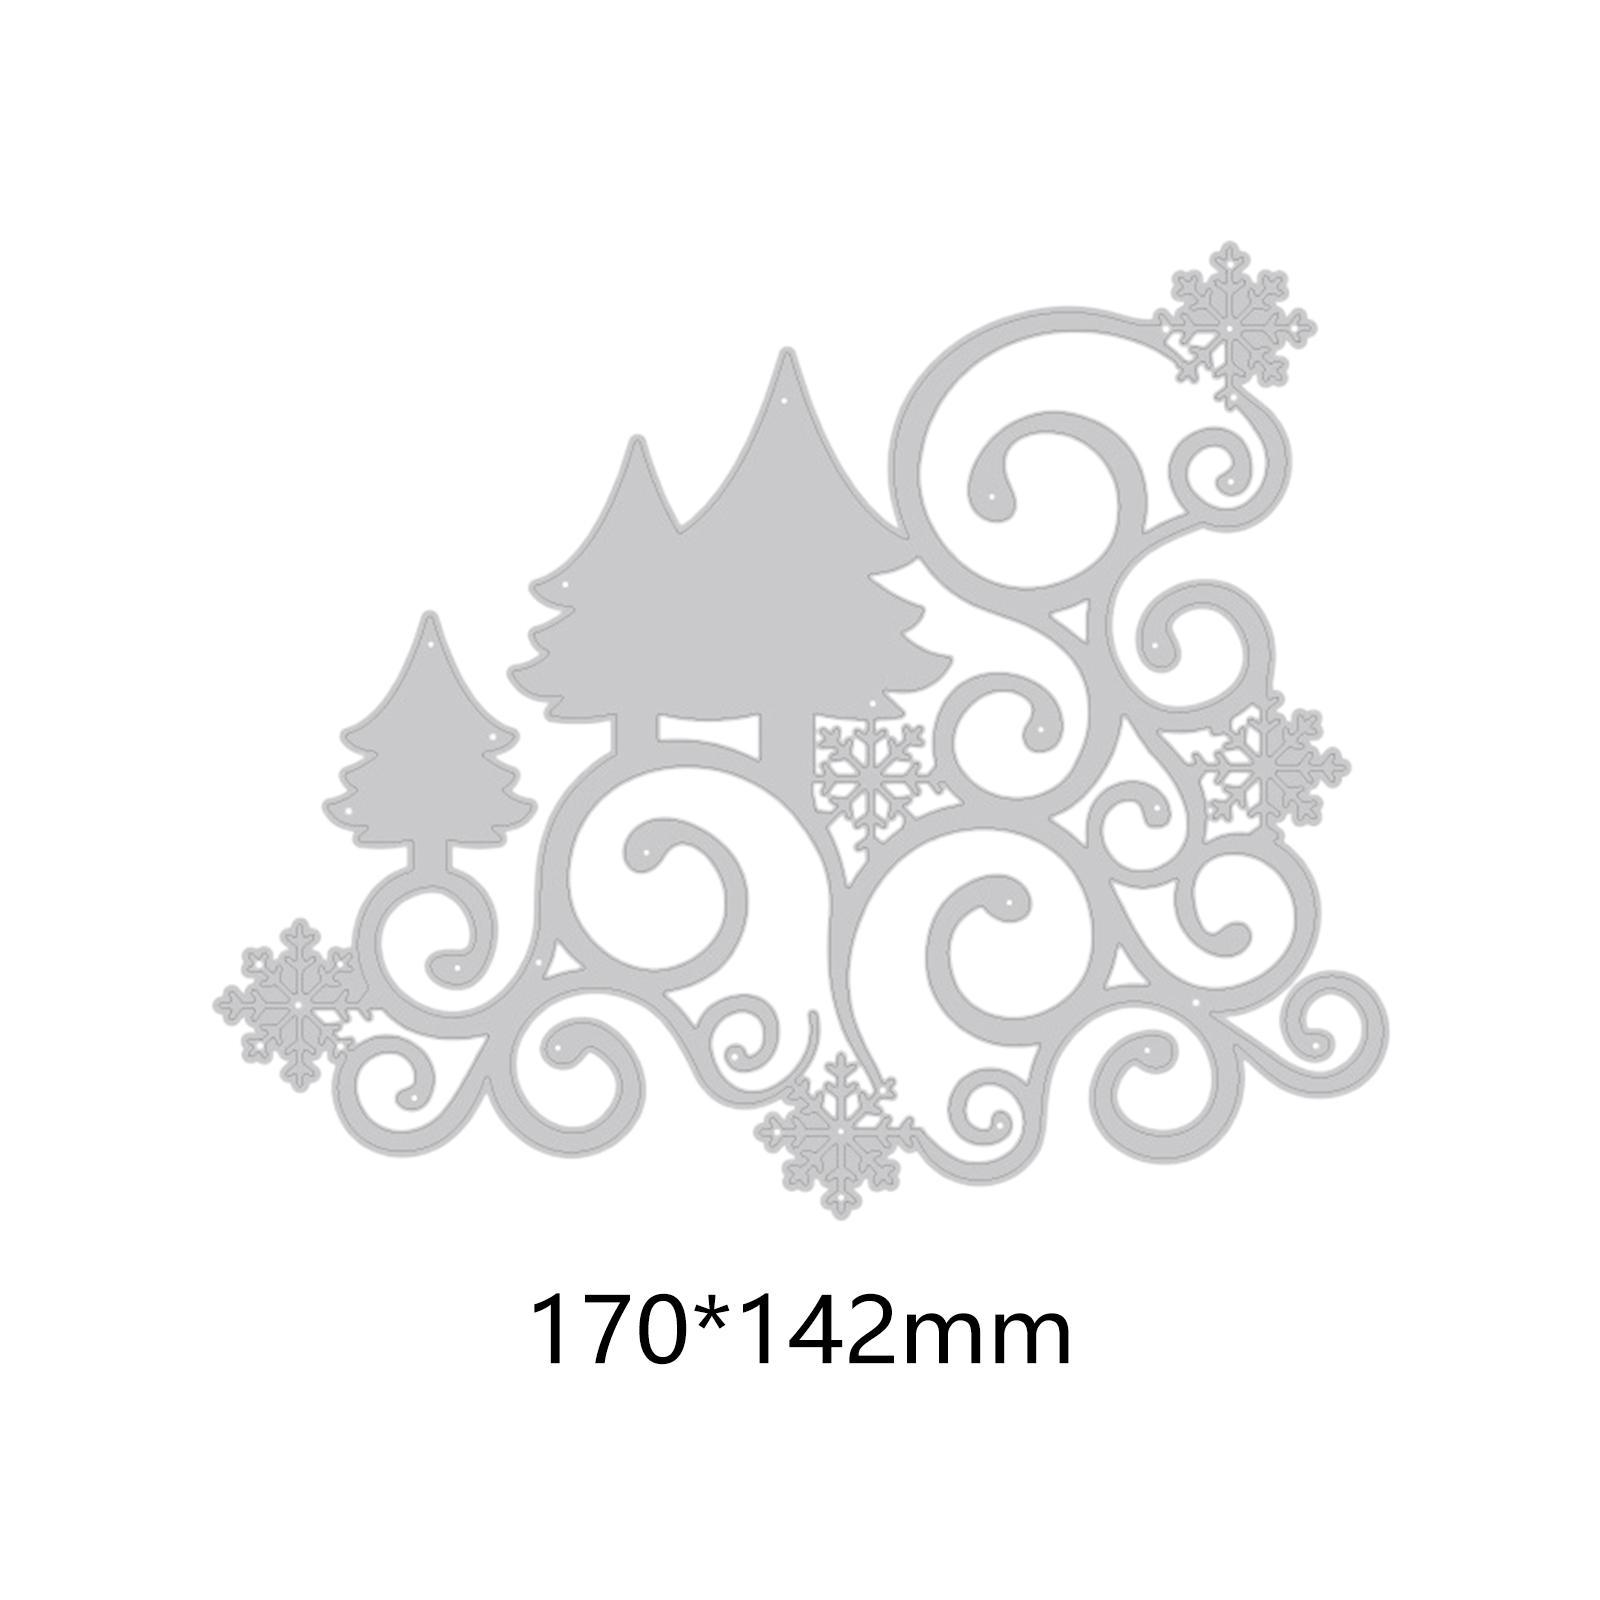 Metal Cutting Dies Cut Stencils for Card Making Supplies Easy to Use Christmas Tree Die Cuts